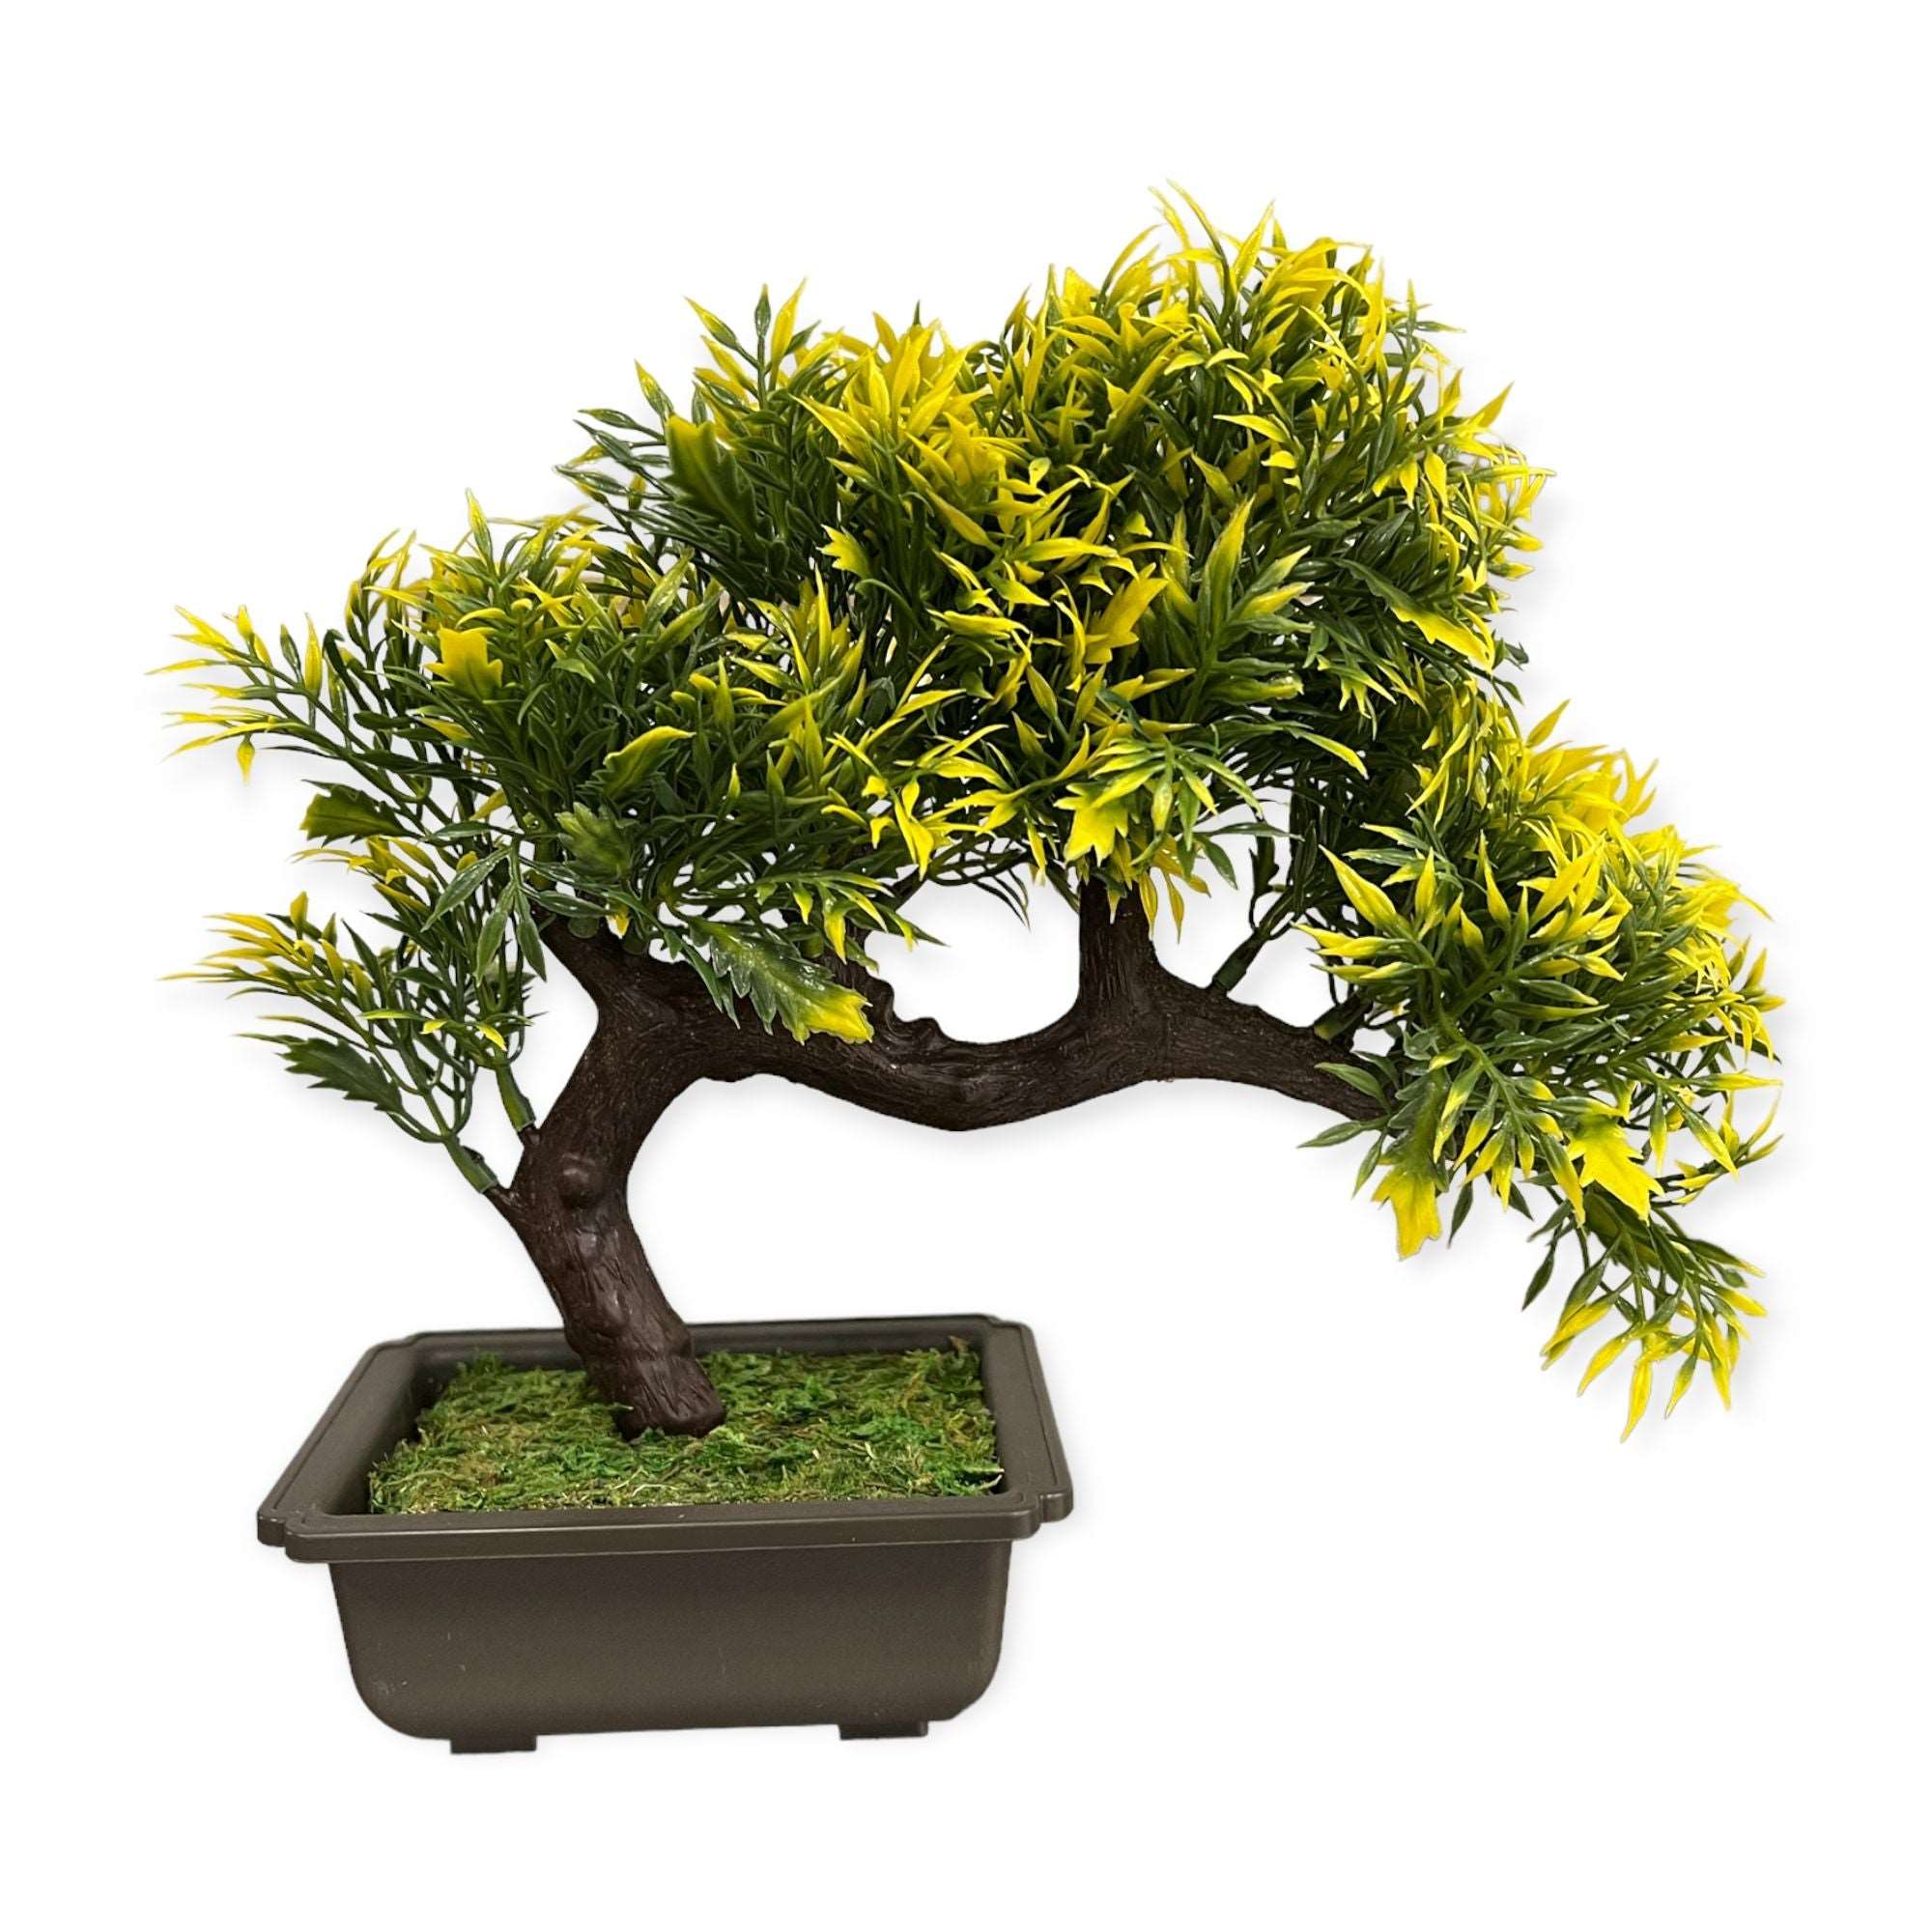 Artificial : Yellow & Green Sideways Bonsai Online on Sale from HnG Nursery for trees & plants